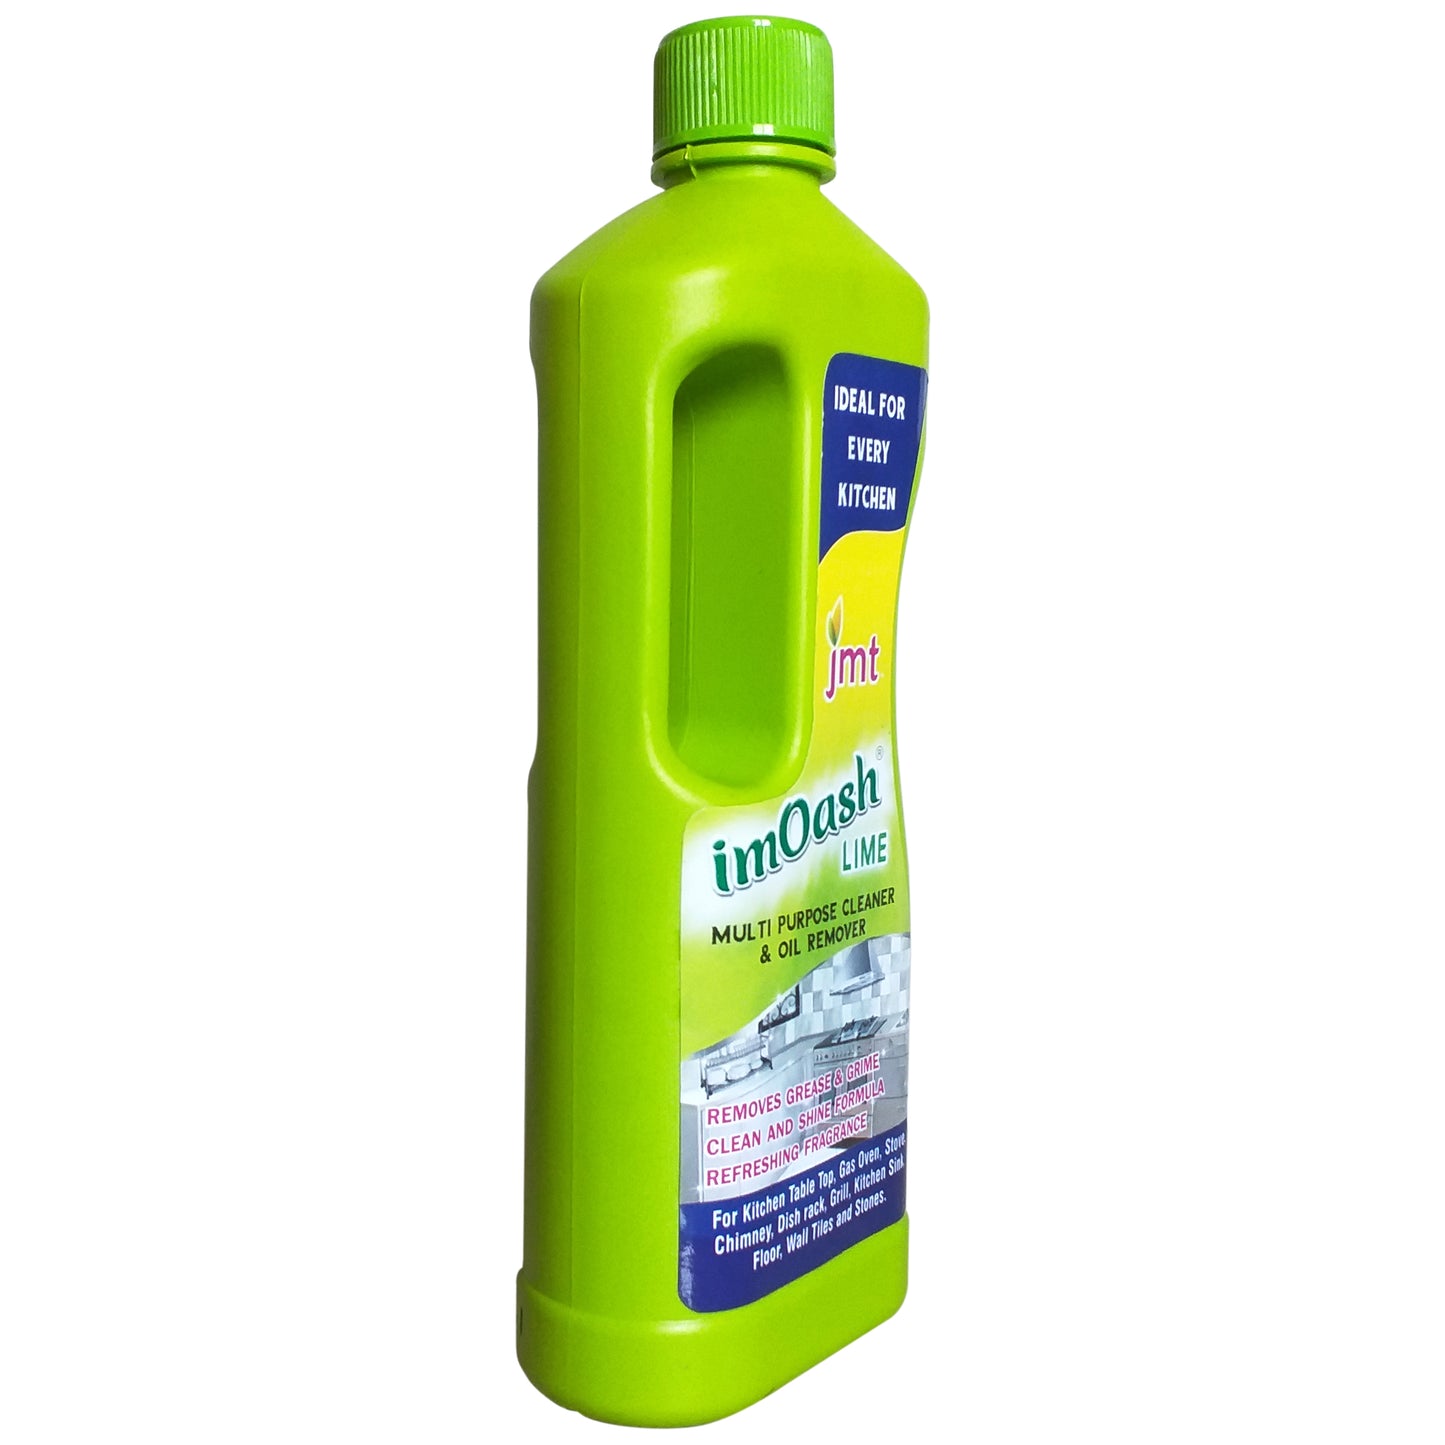 500ml Imoash Lime Multi-purpose Kitchen Cleaner and Oil Remover